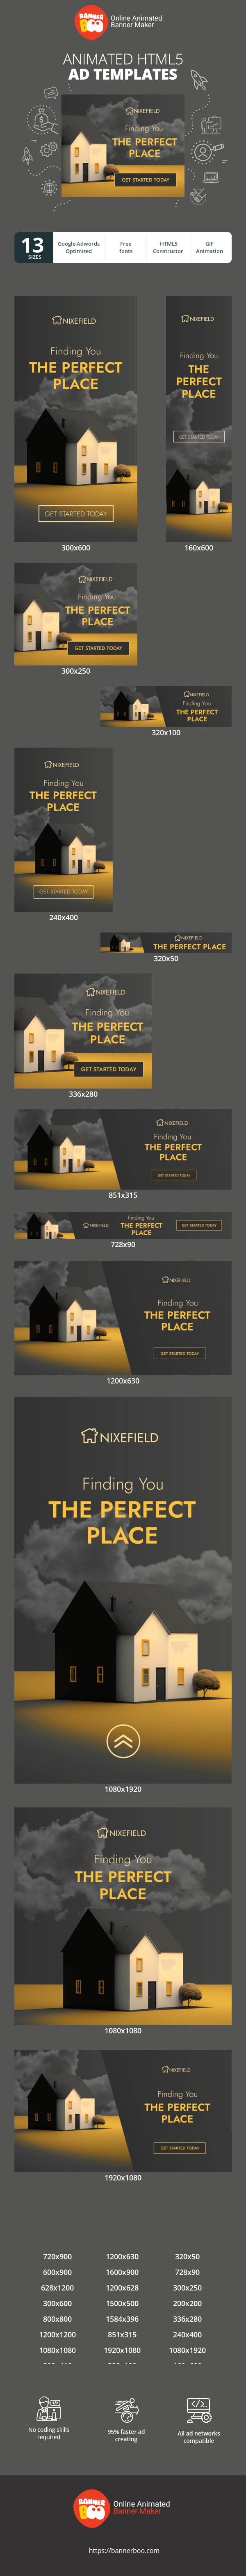 Banner ad template — Finding You The Perfect Place — Real Estate